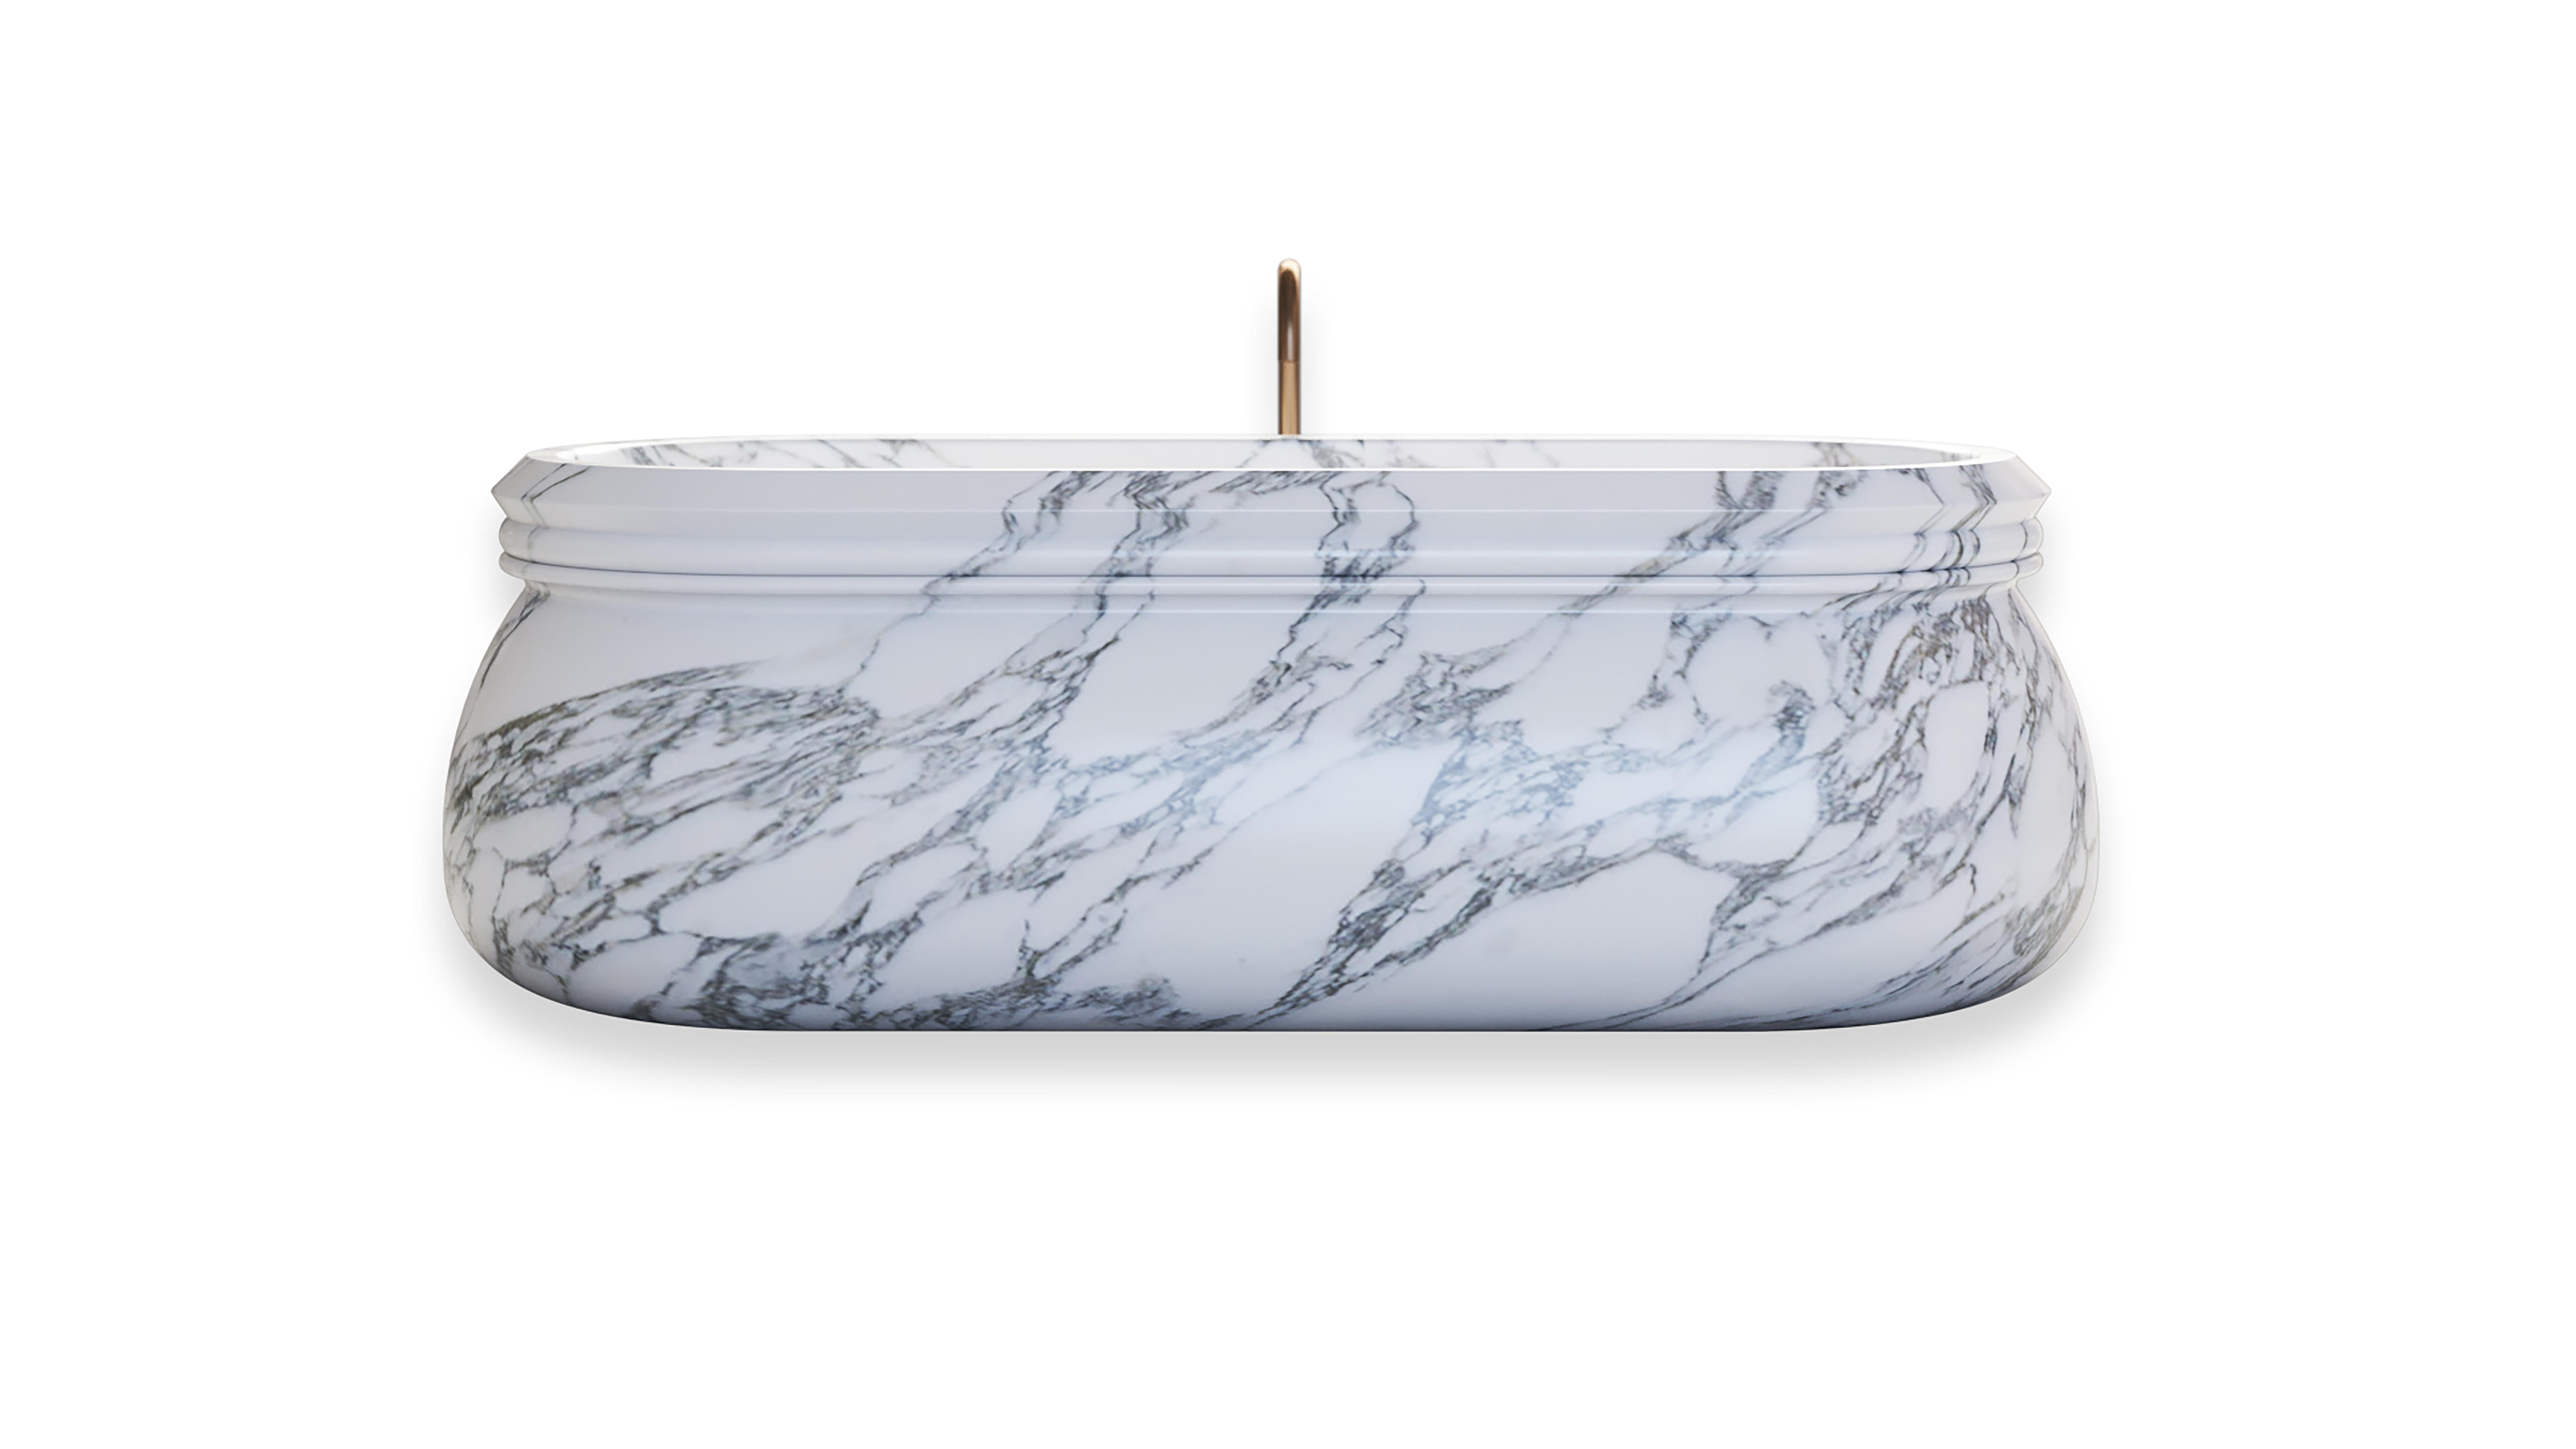 Cake bath tub, sculpted from a solid block of White Arabescato Marble. 
Limited edition 1/5. 